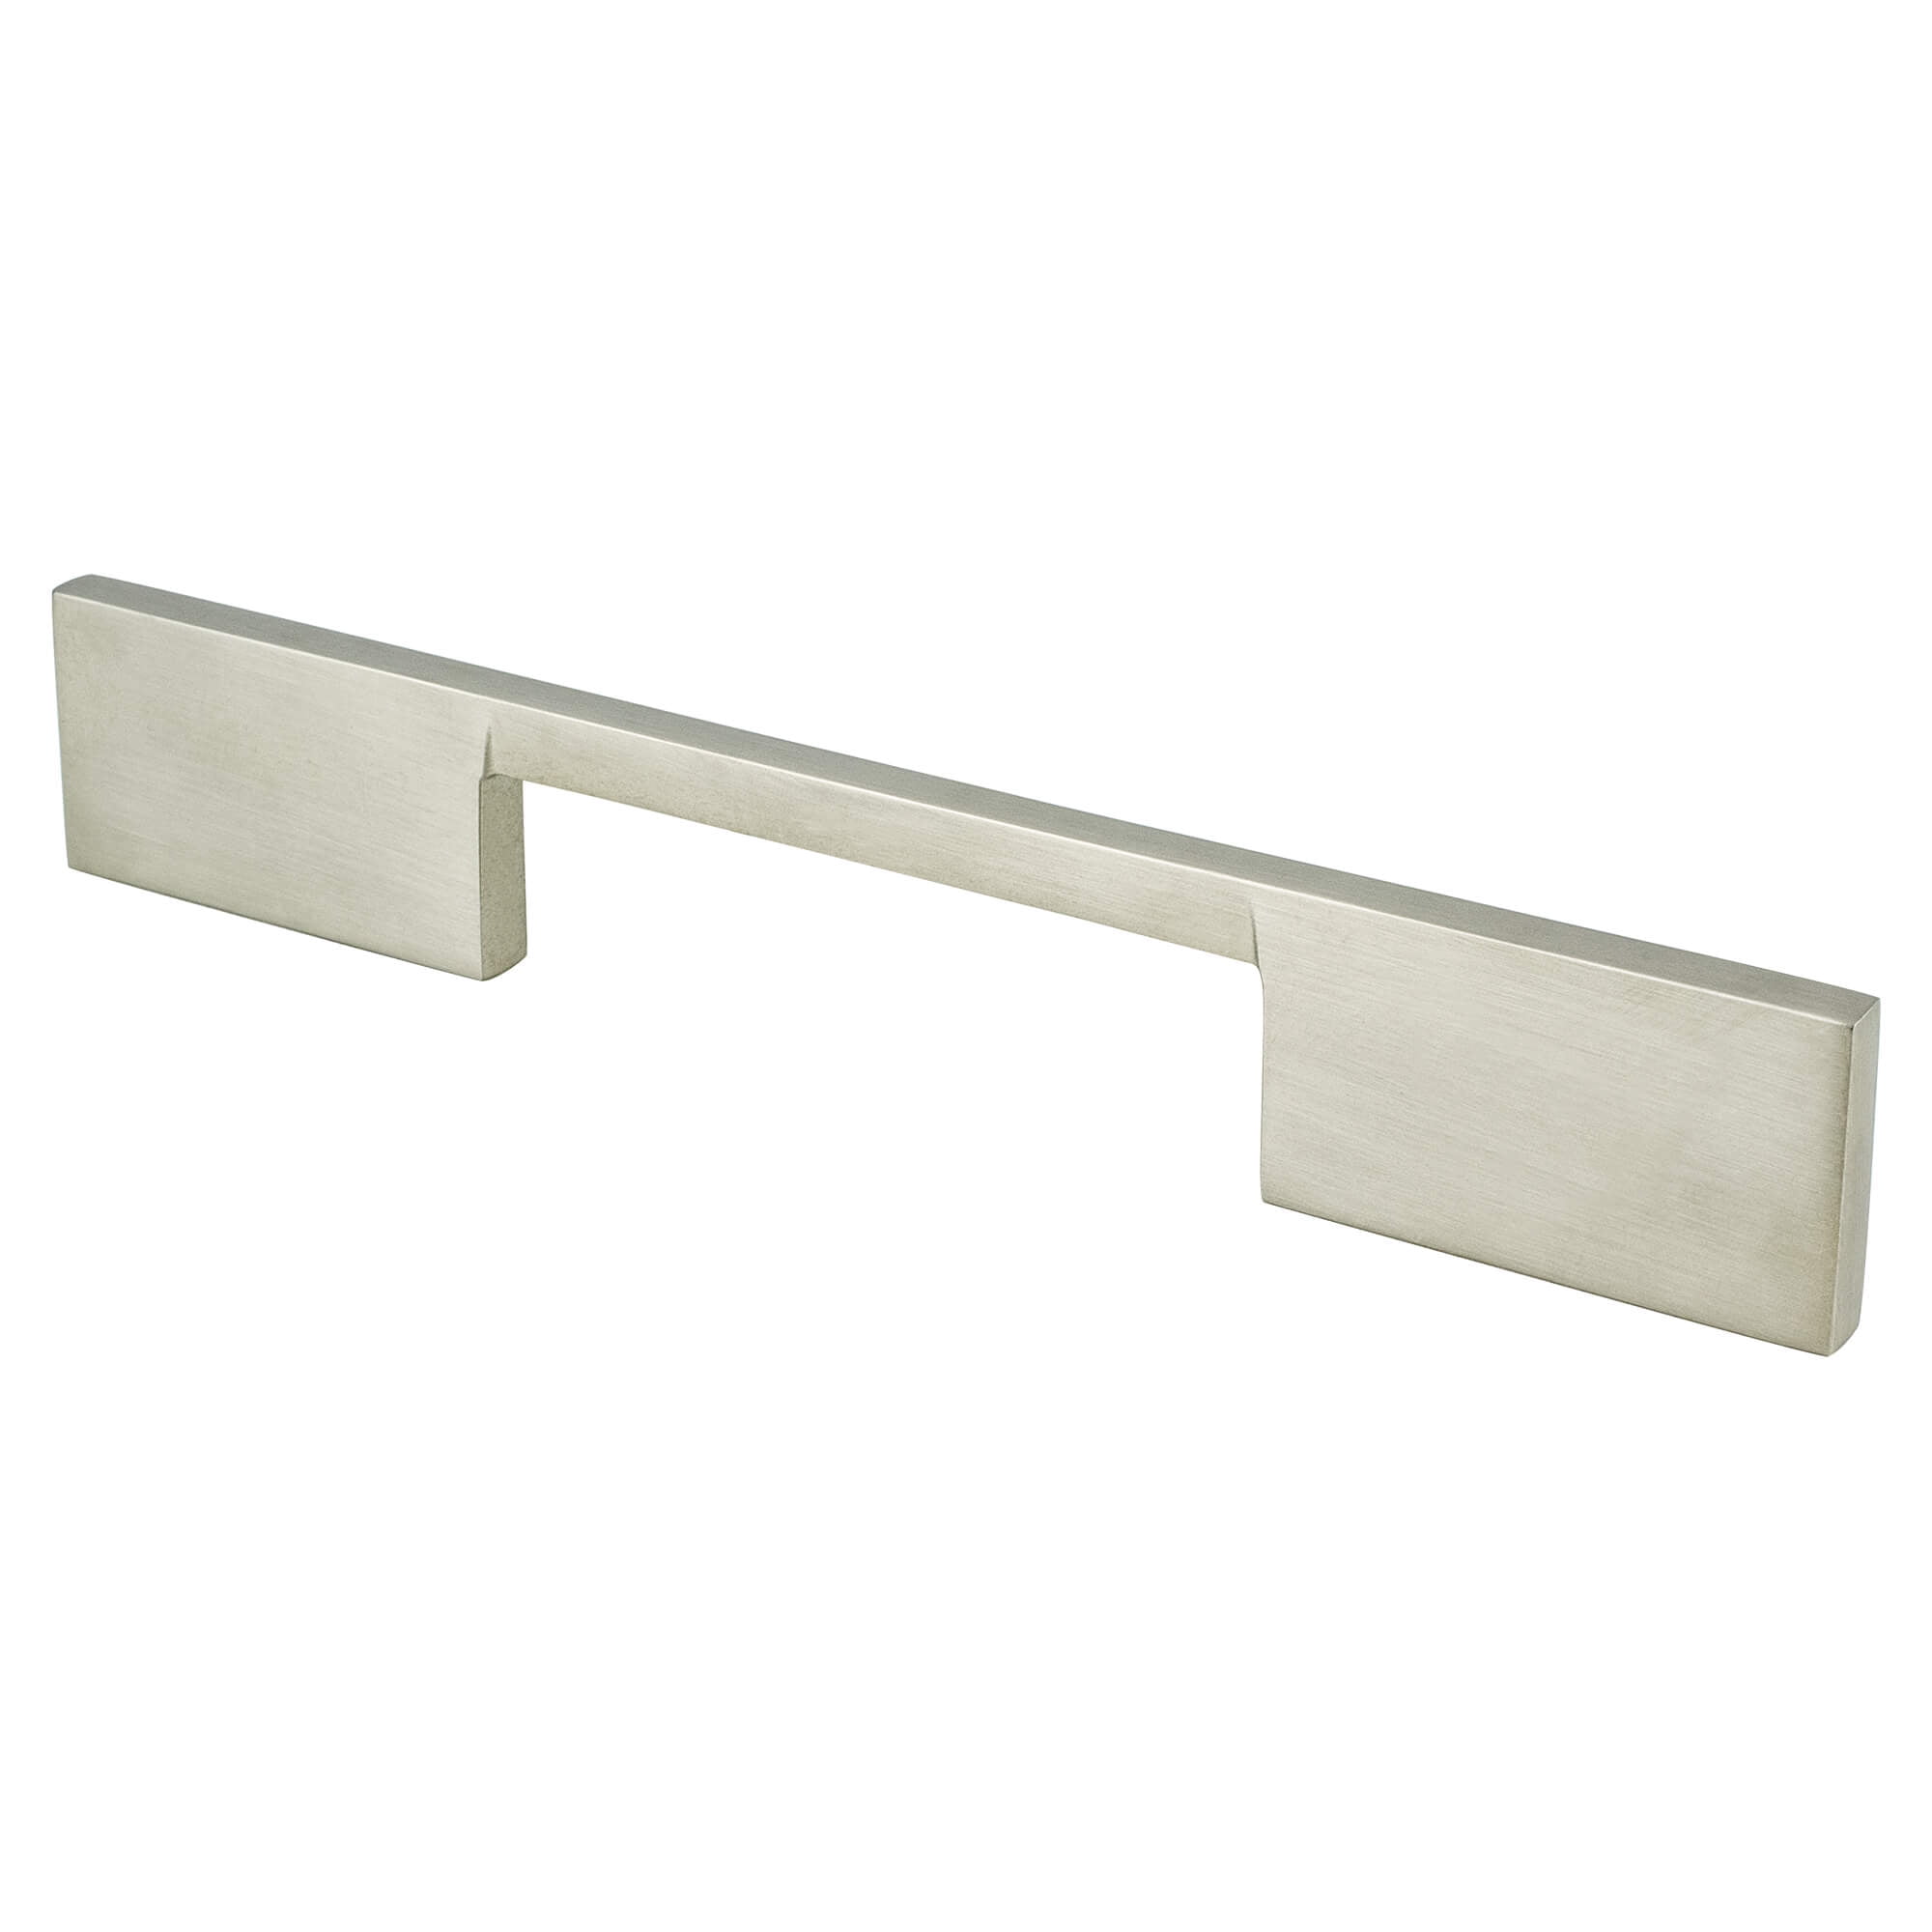 9299-1bpn-c 128 Mm Cc I-spazio Pull With Brushed Nickel